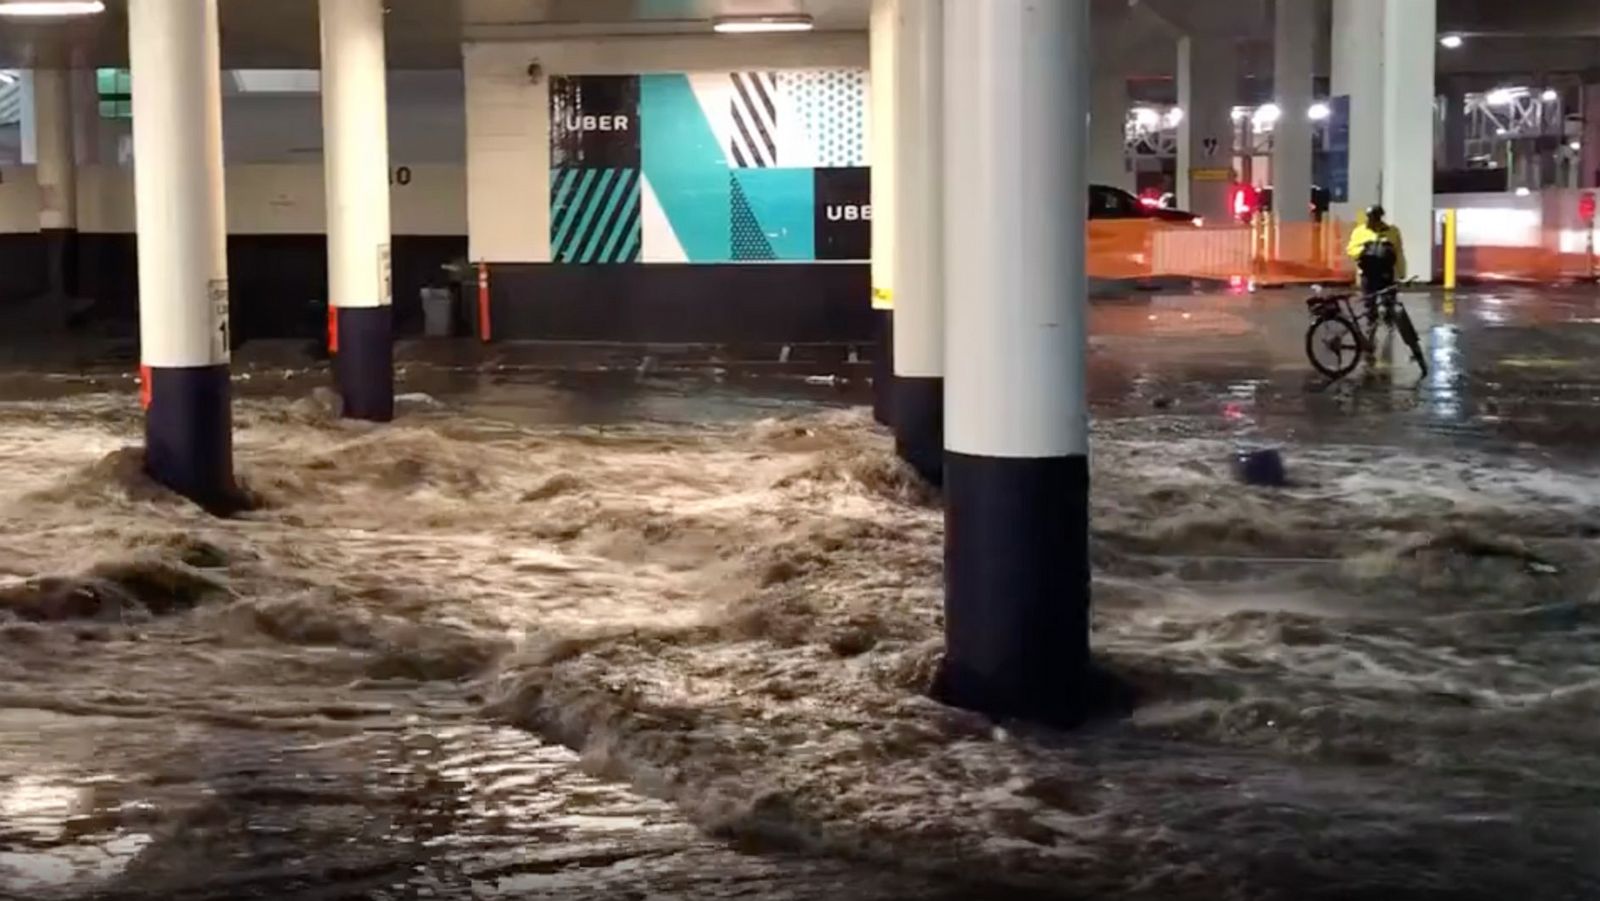 Flooding hits Las Vegas after overnight downpours - ABC News